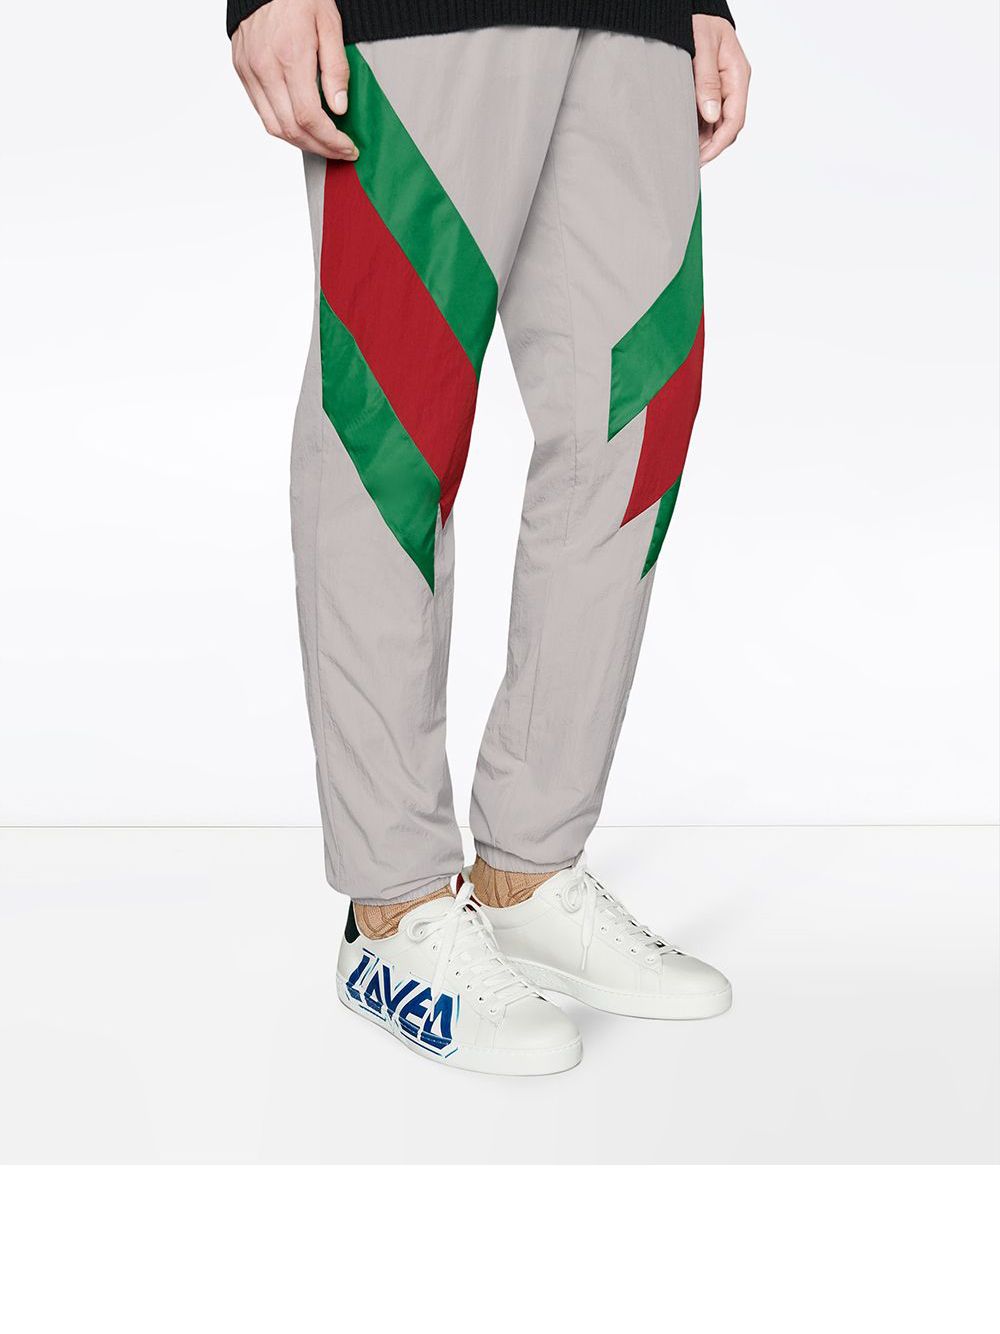 gucci loved sneakers mens